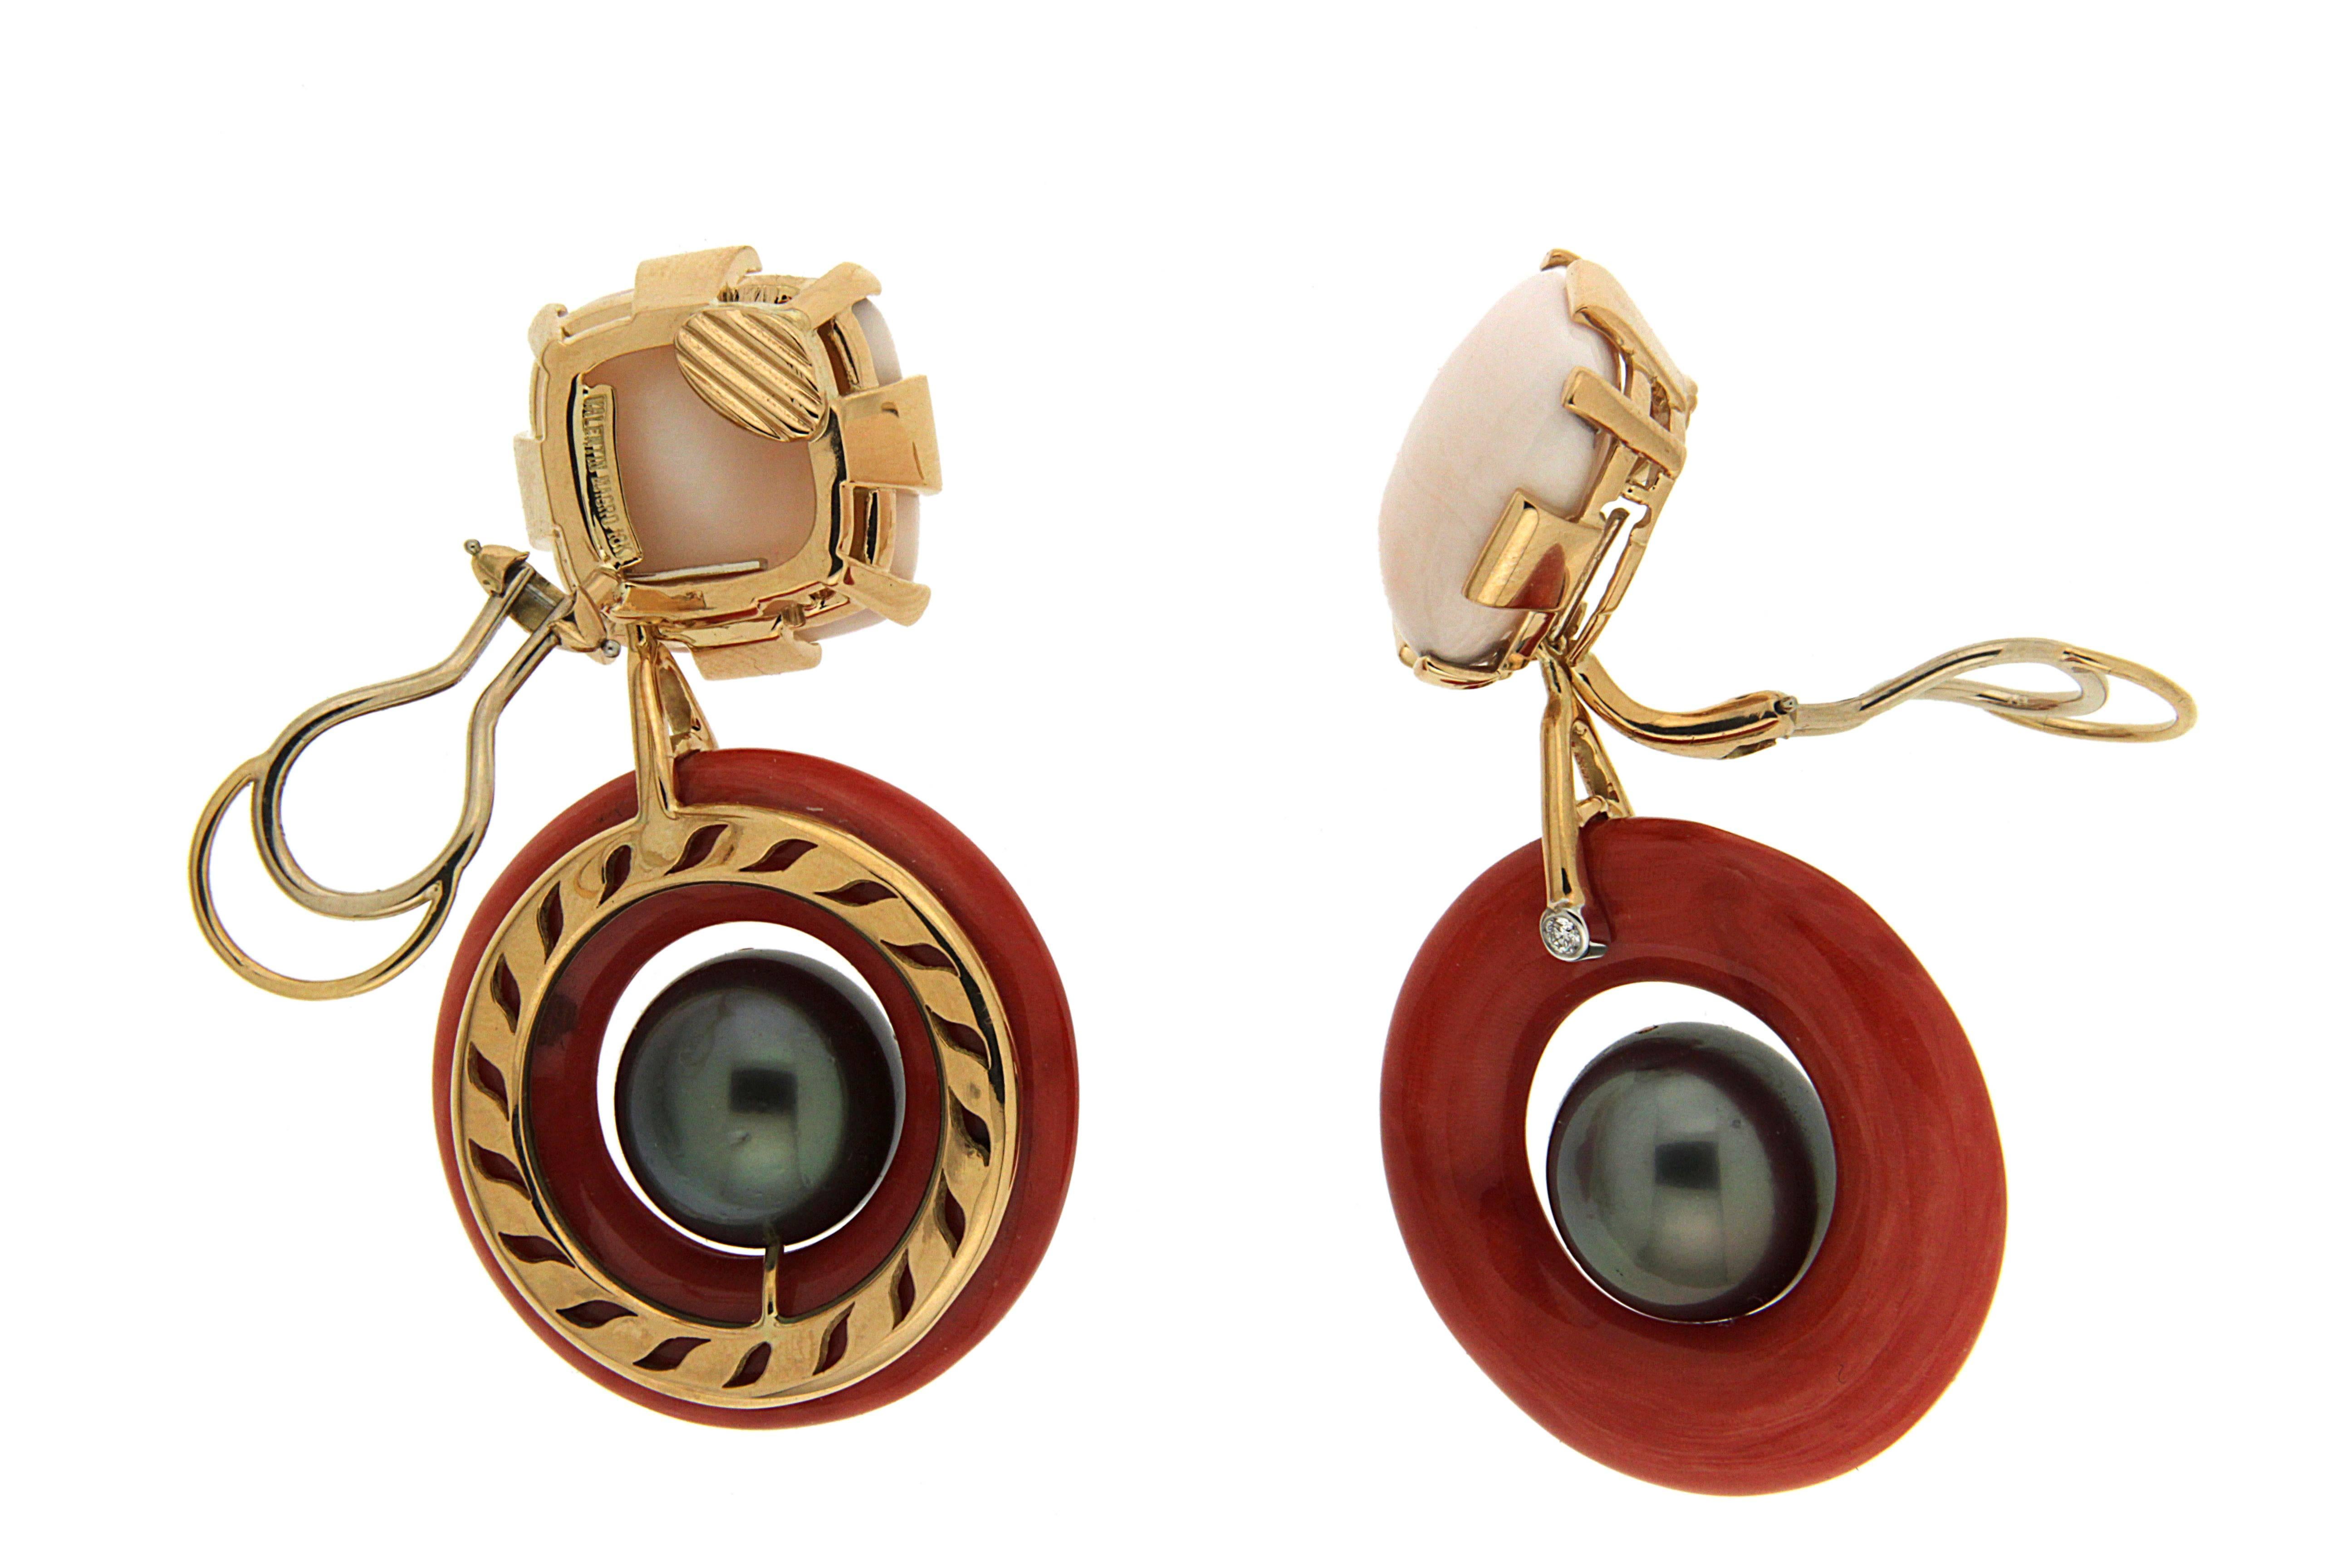 These drop earrings created by Valentin Magro, have a subtle marine motif. The base features pale pink coral carved into cushions. Bars of 18k yellow gold secure the gem. The lowermost gold piece also supports a dark coral ring with a Tahitian pearl